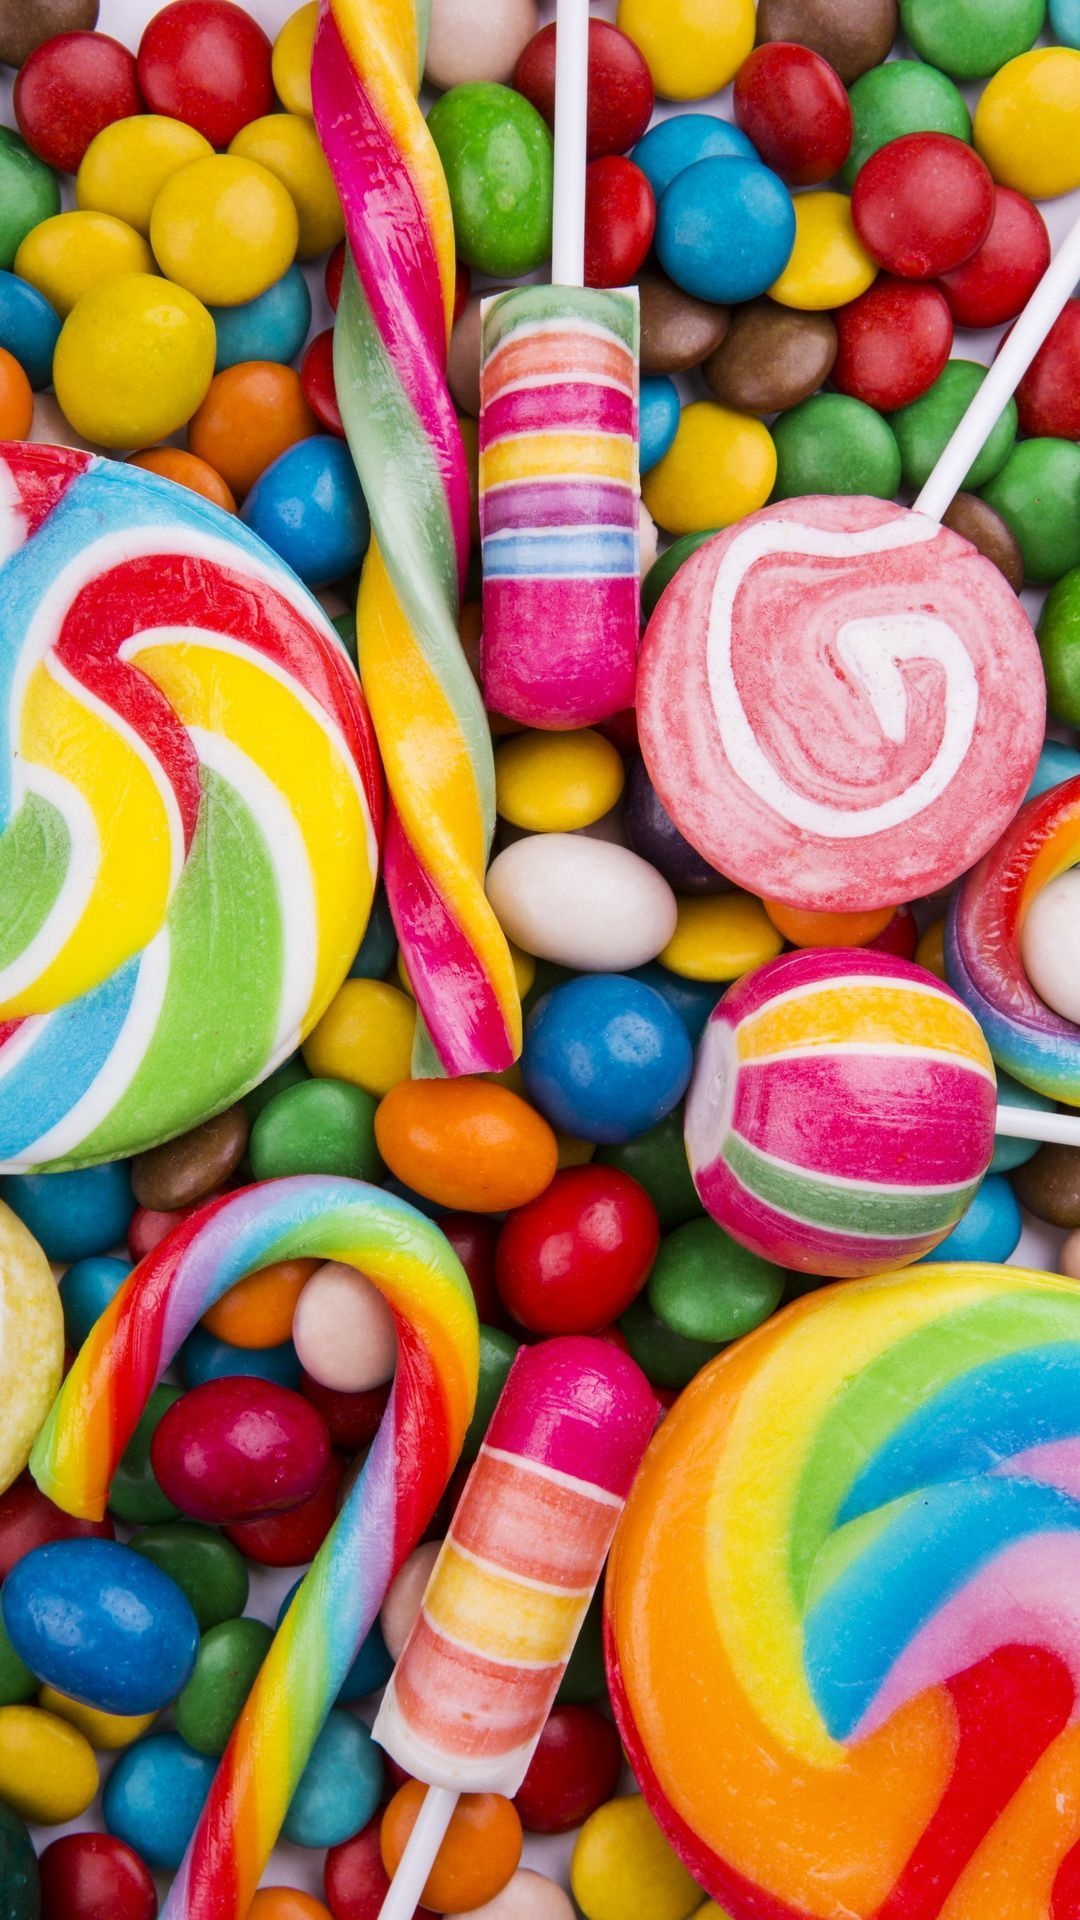 Sugary candy wallpapers, Sweet cravings, Eye-catching designs, Delicious treats, 1080x1920 Full HD Handy